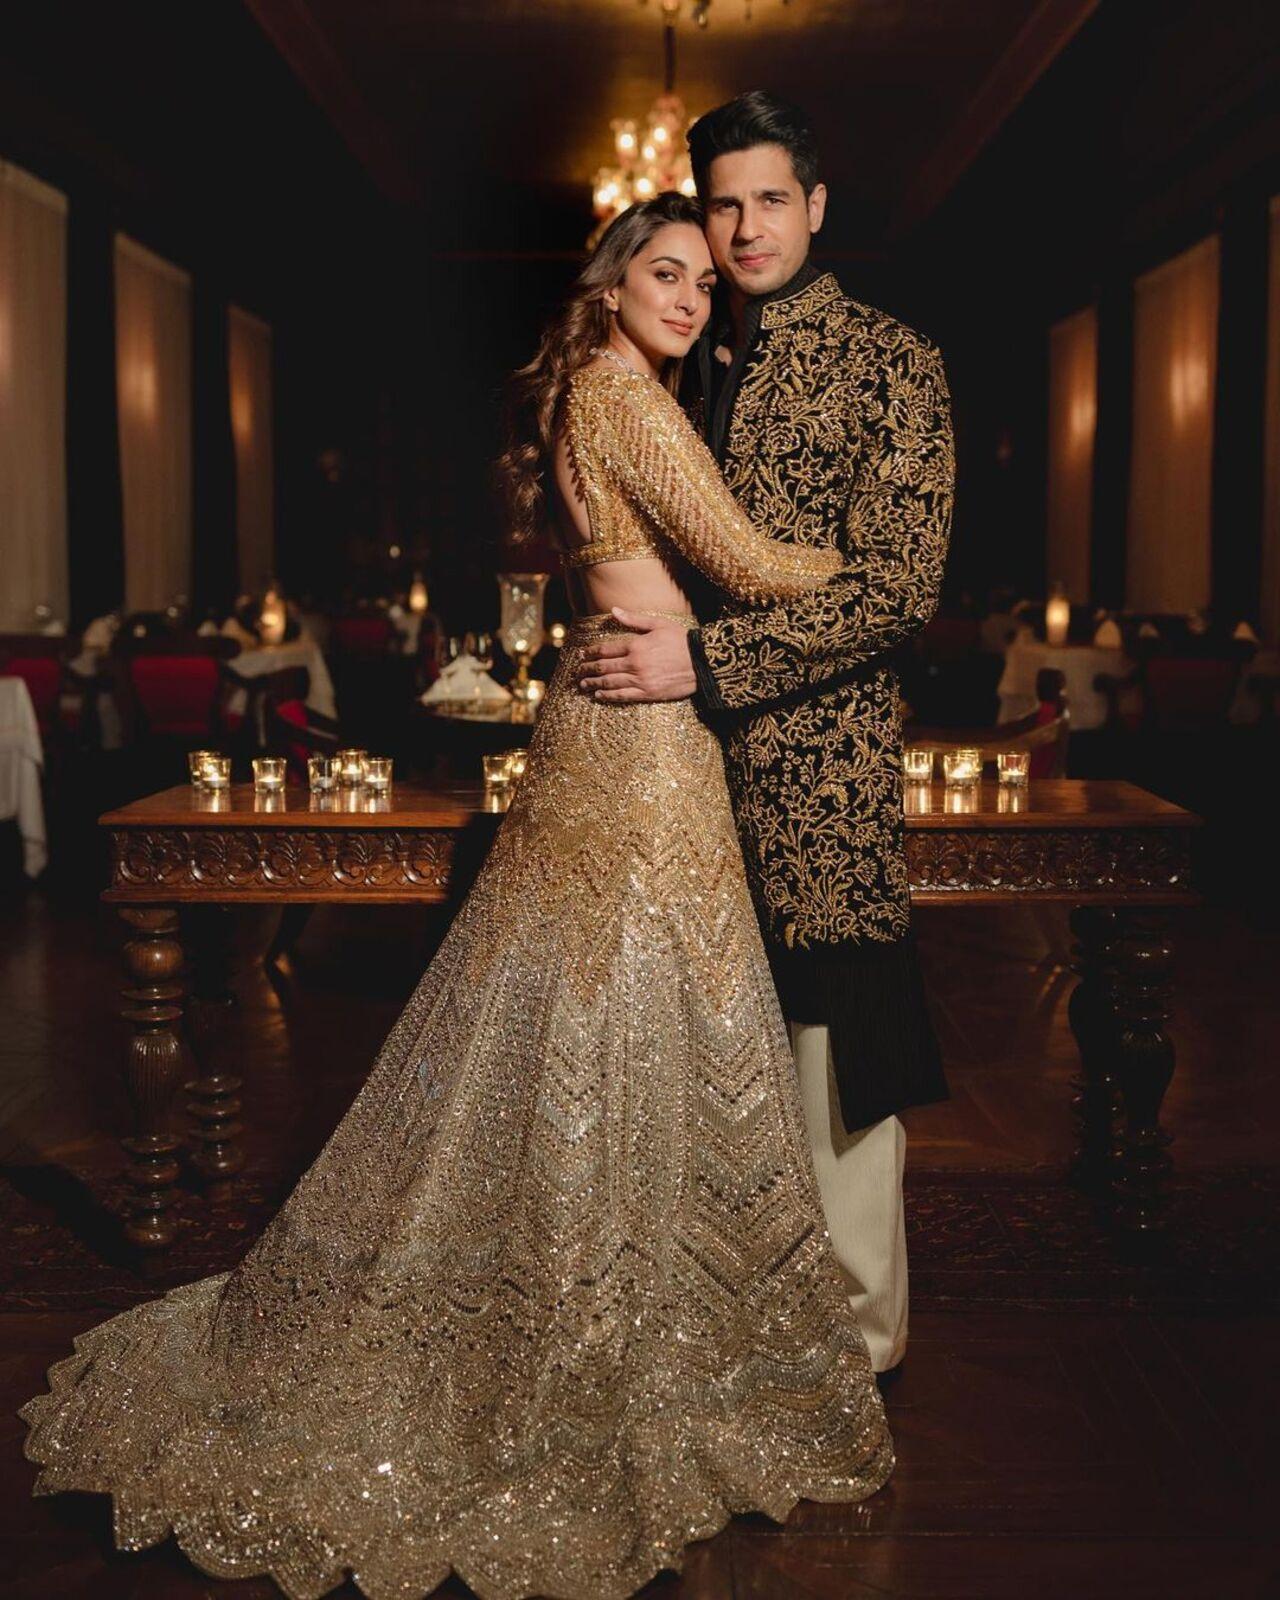 Kiara Advani-Sidharth Malhotra: Sidharth and Kiara are Karan Johar's 'students'. While they have appeared on the show in the past, the couple didn't grace Koffee With Karan together